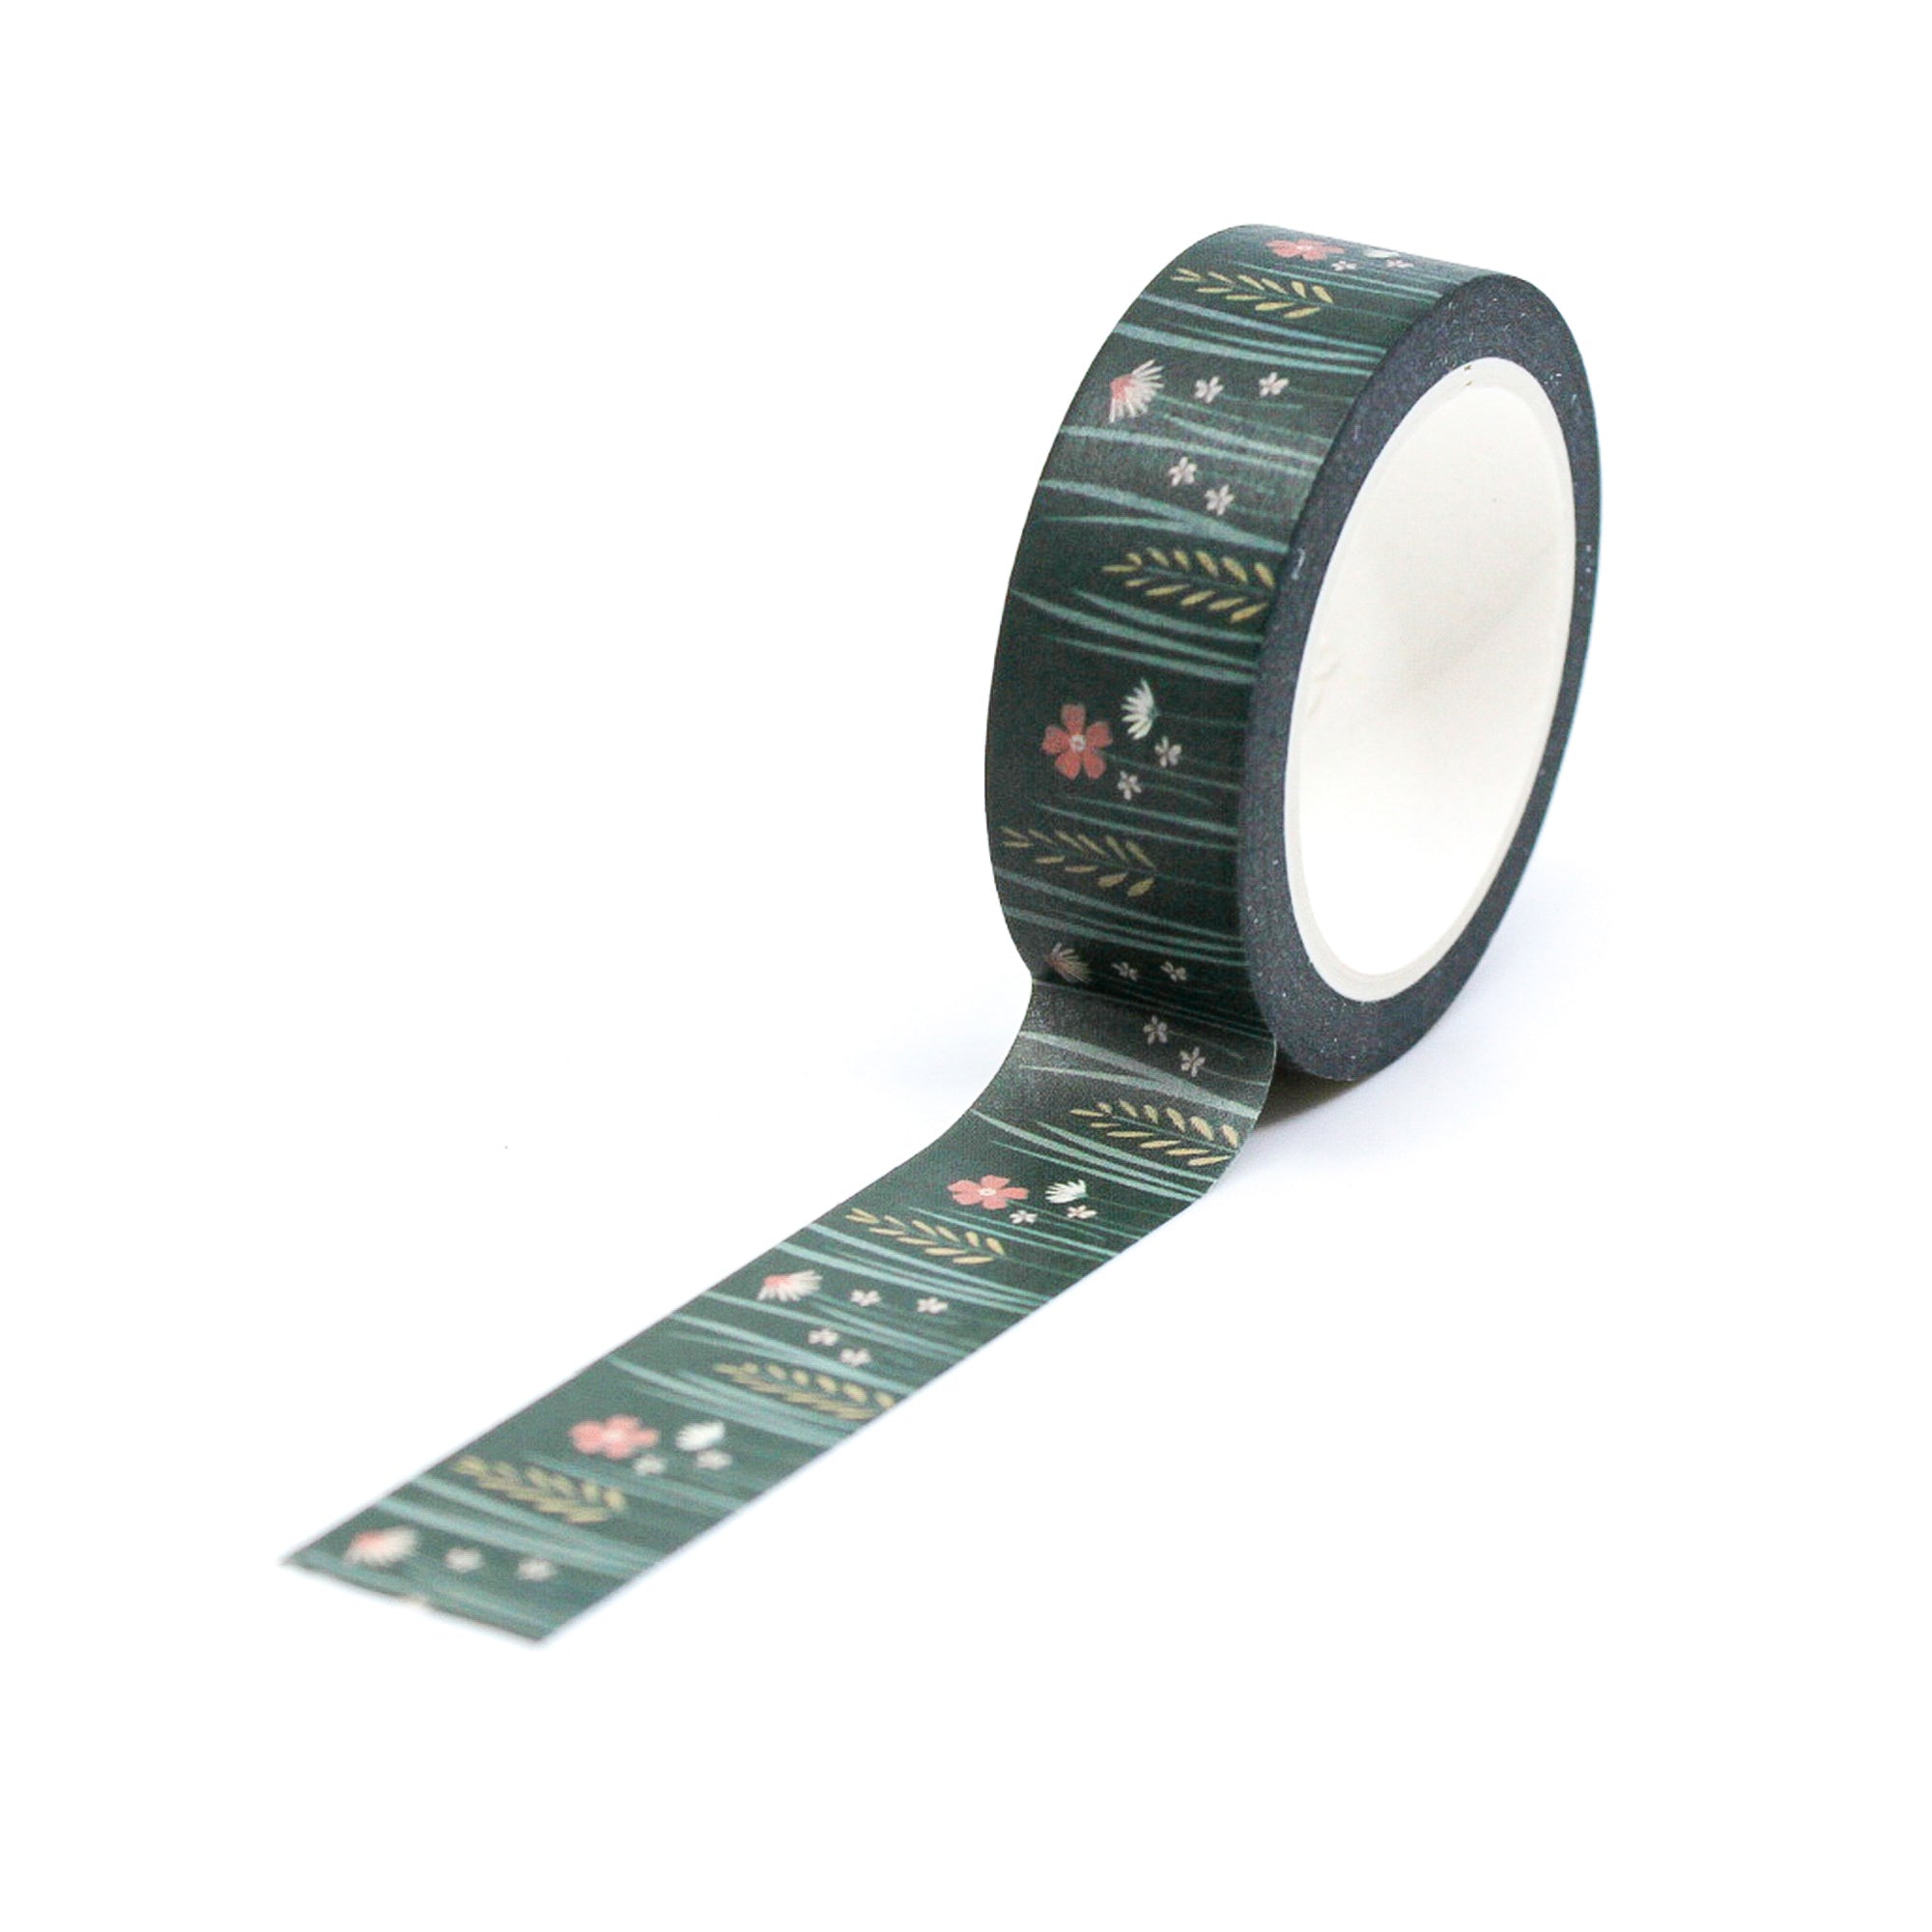 Infuse your creations with the enchantment of the outdoors using our wildflower washi tape, adorned with a charming display of wildflowers, evoking a sense of freedom and natural beauty. This tape is from Maylay Co. and sold at BBB Supplies Craft Shop.